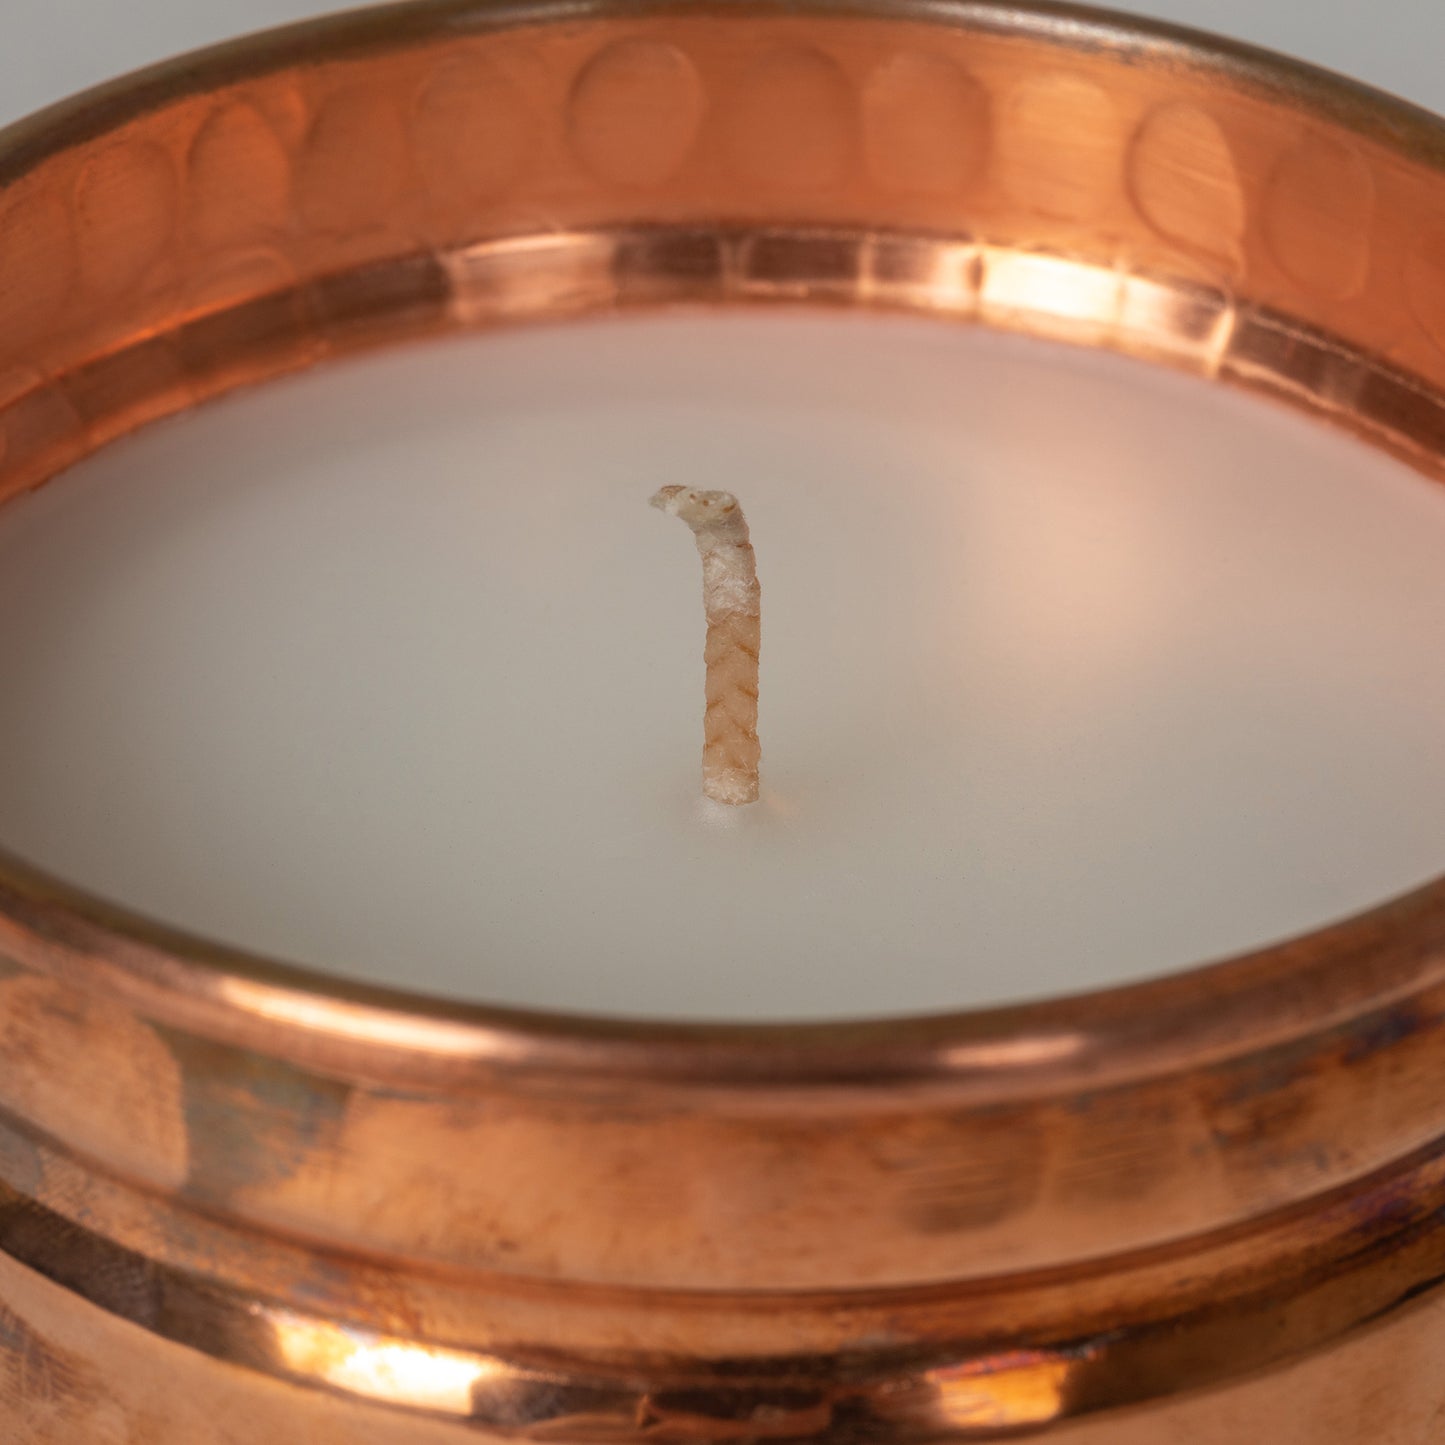 Copper Artisan Hand-Poured Candle